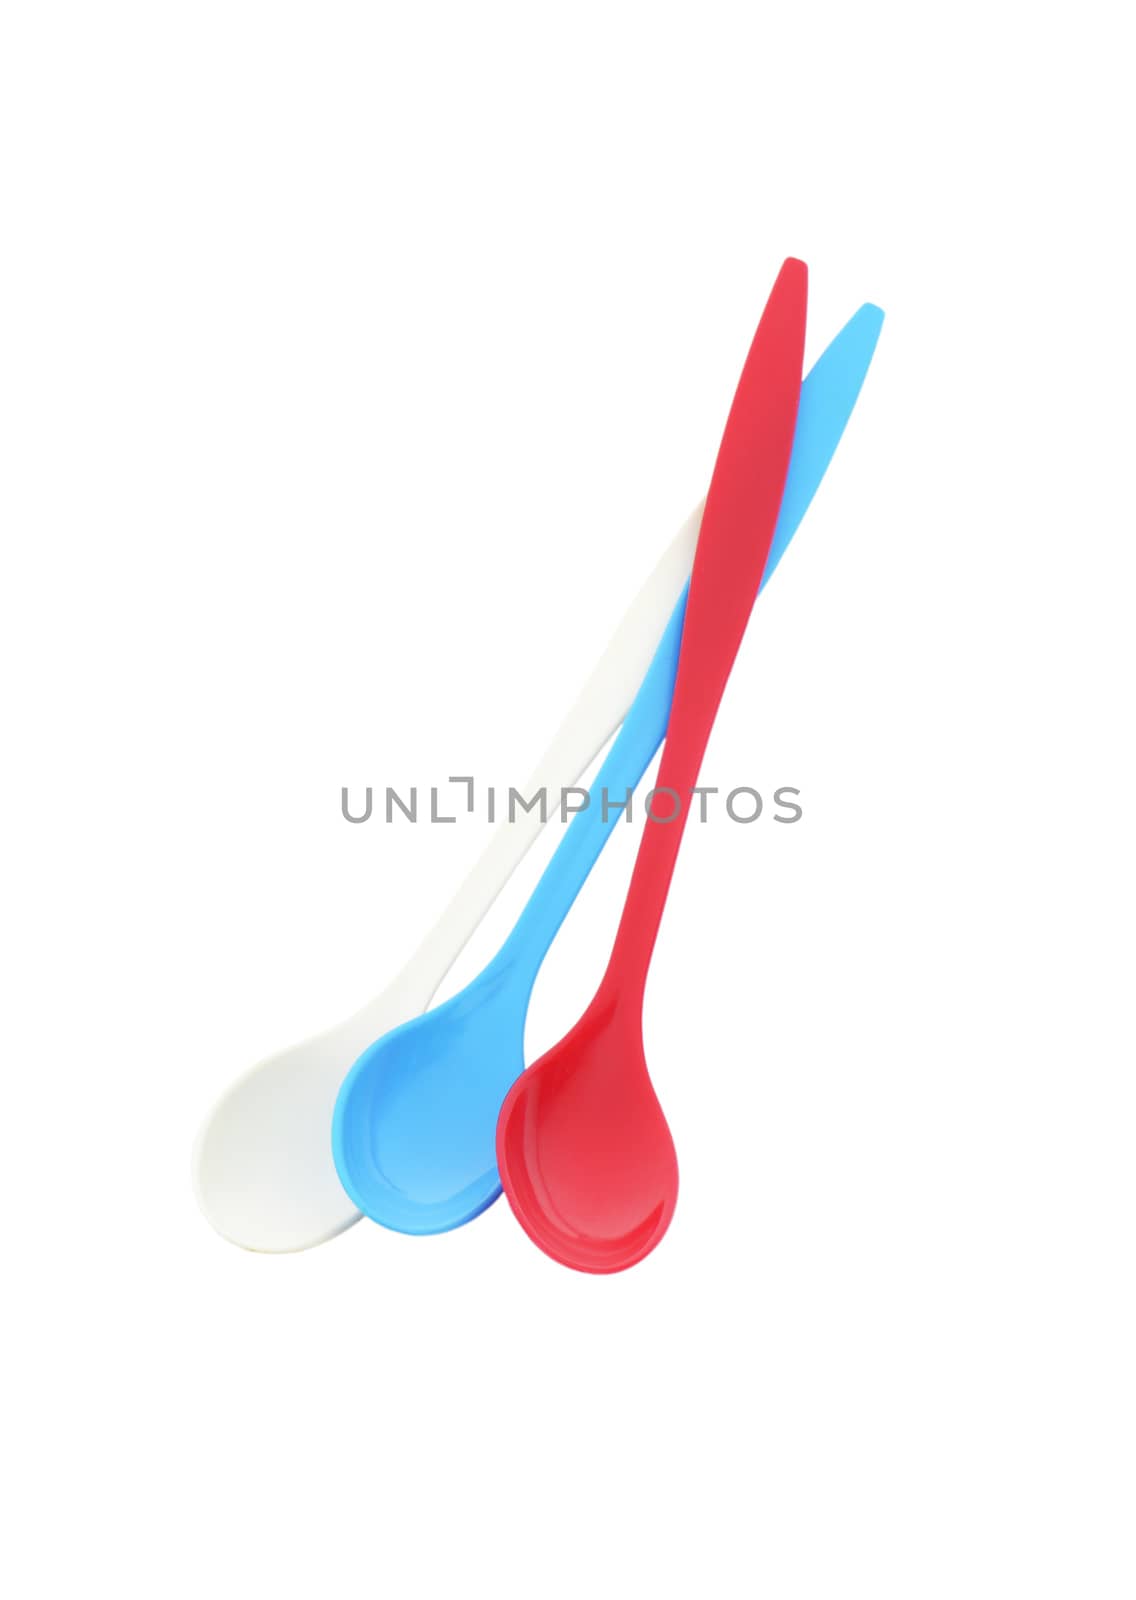 Three empty long plastic spoons - red, blue and white